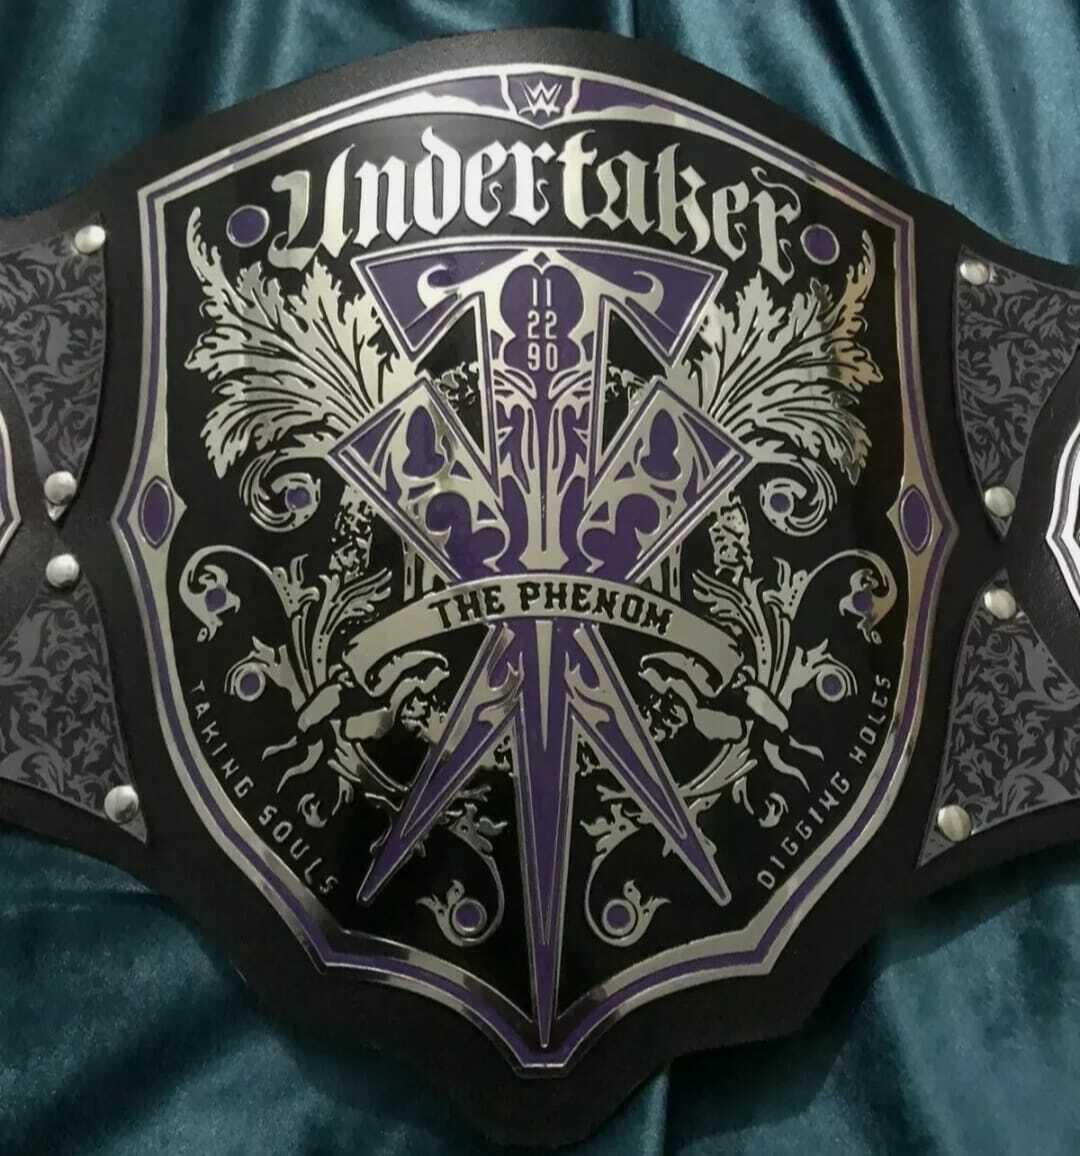 RAYS WWE Undertaker The Phenom Wrestling Champion with Wood CASE Replica Belt Adult Size. 